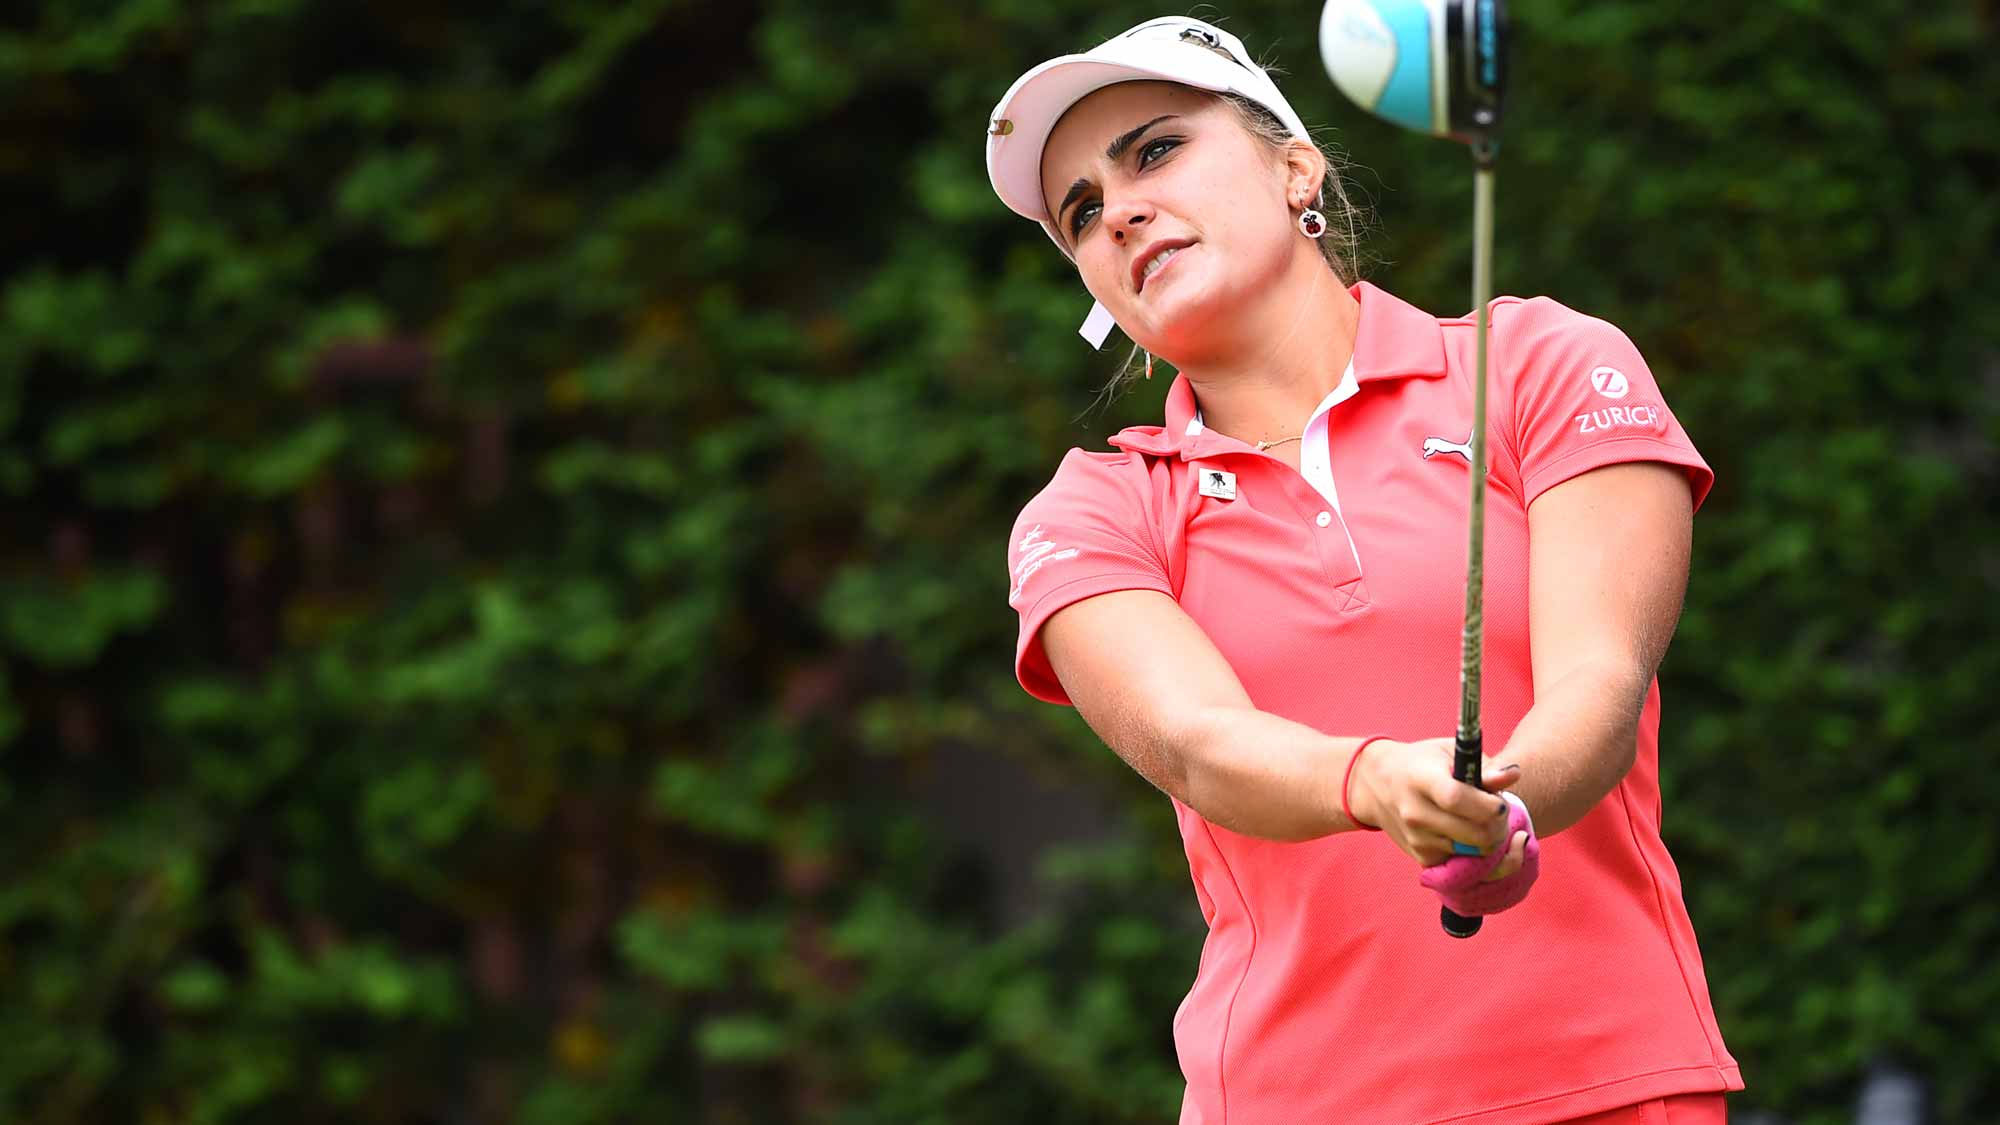 Lexi Thompson of the USA hits her tee shot on the 14th hole during the second round of the TOTO Japan Classics 2015 at the Kintetsu Kashikojima Country Club